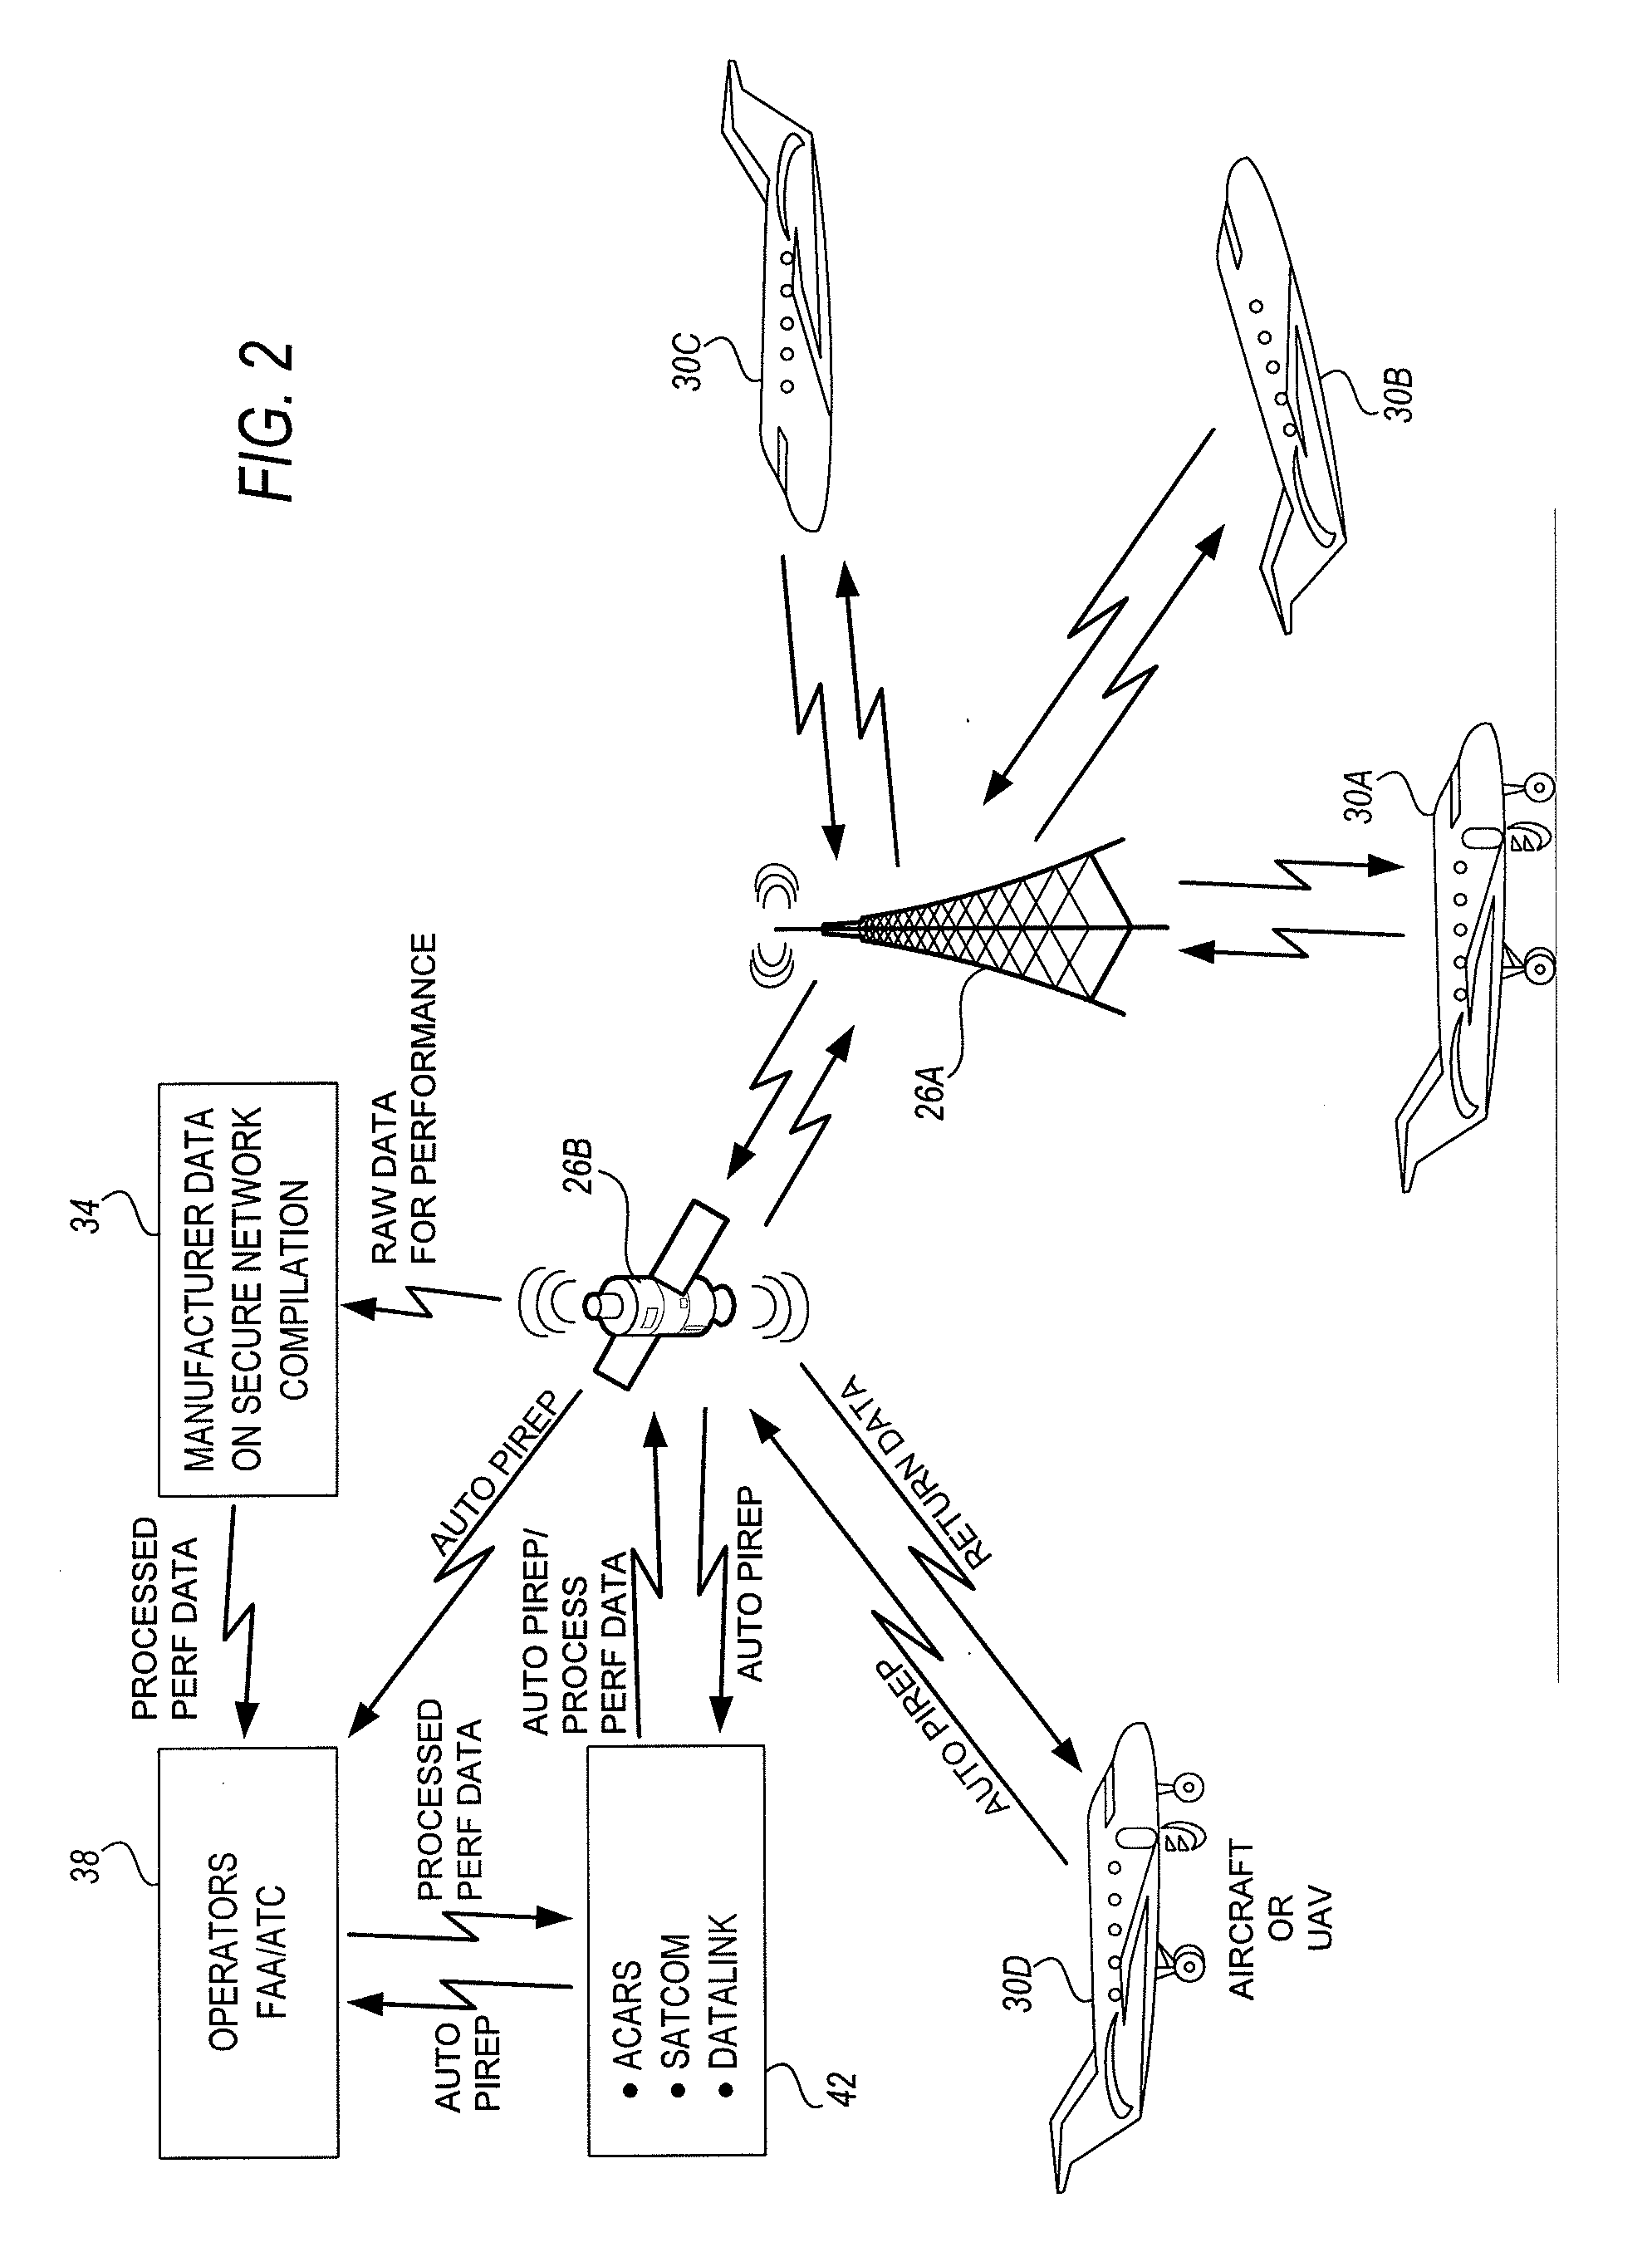 Systems and methods of improving or increasing information concerning, particularly, runway conditions available to pilots of landing aircraft